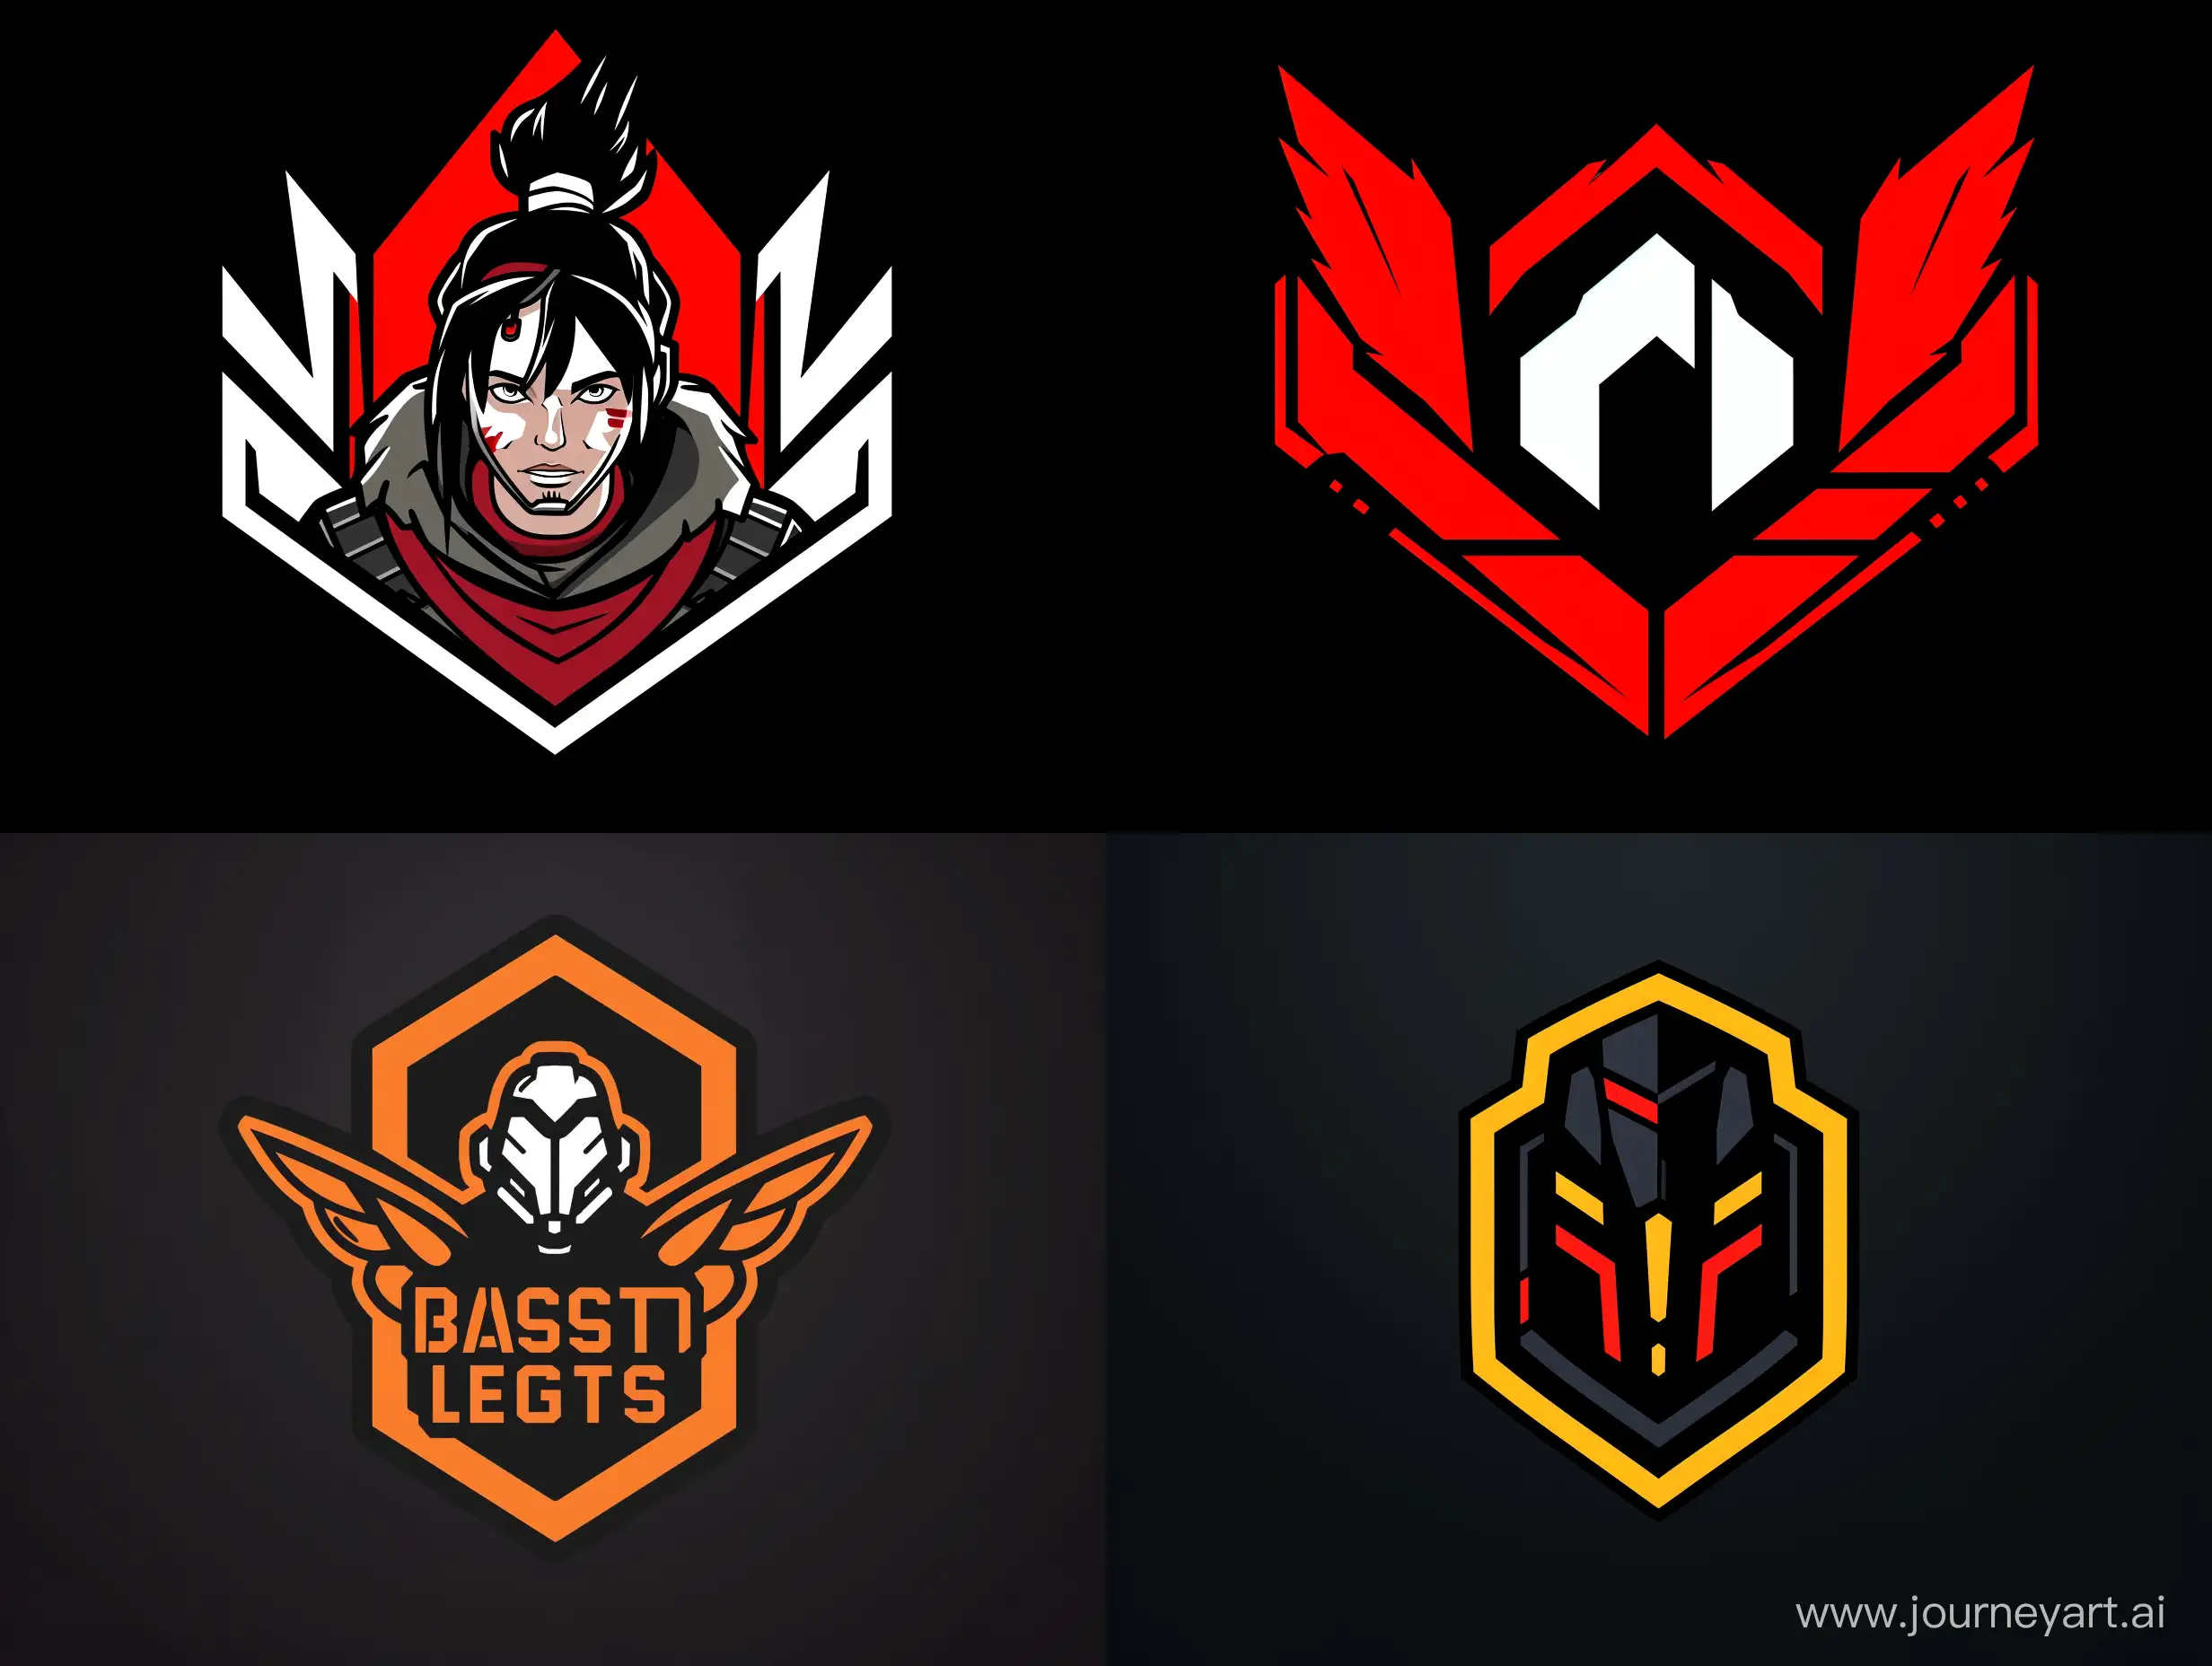 Dynamic-Based-Bots-Esports-Logo-with-Abbreviation-and-Abstract-Elements